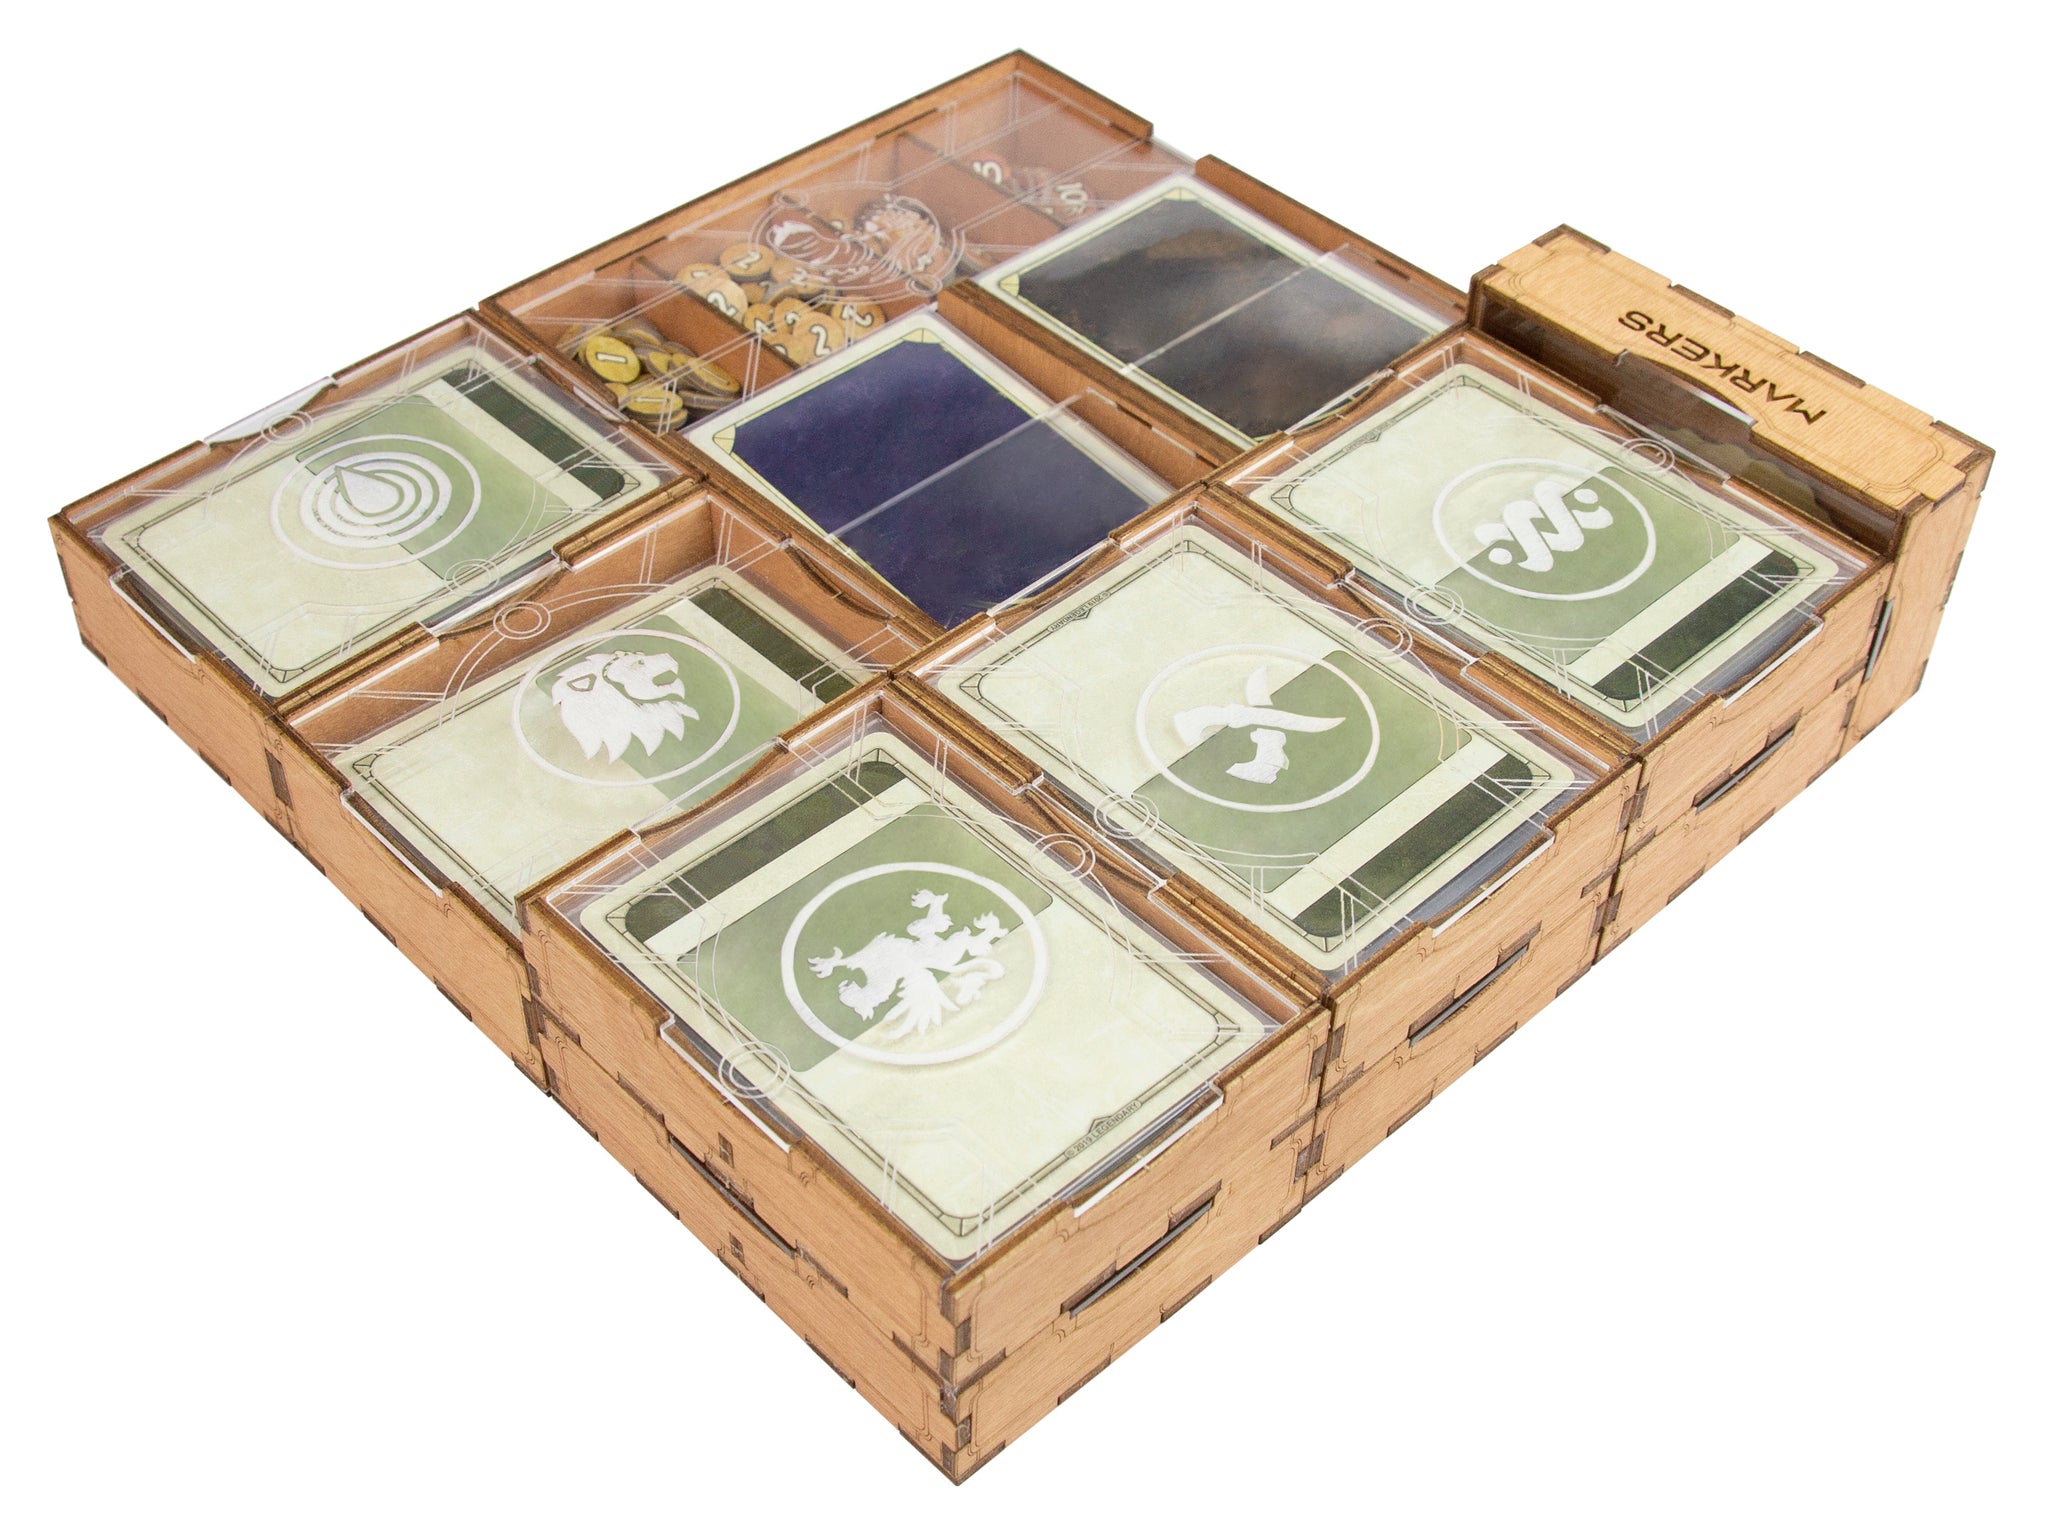 All-in-One Storage Box Compatible with Dune Wooden Board Game and its Ixians & Tleilaxu Expansion